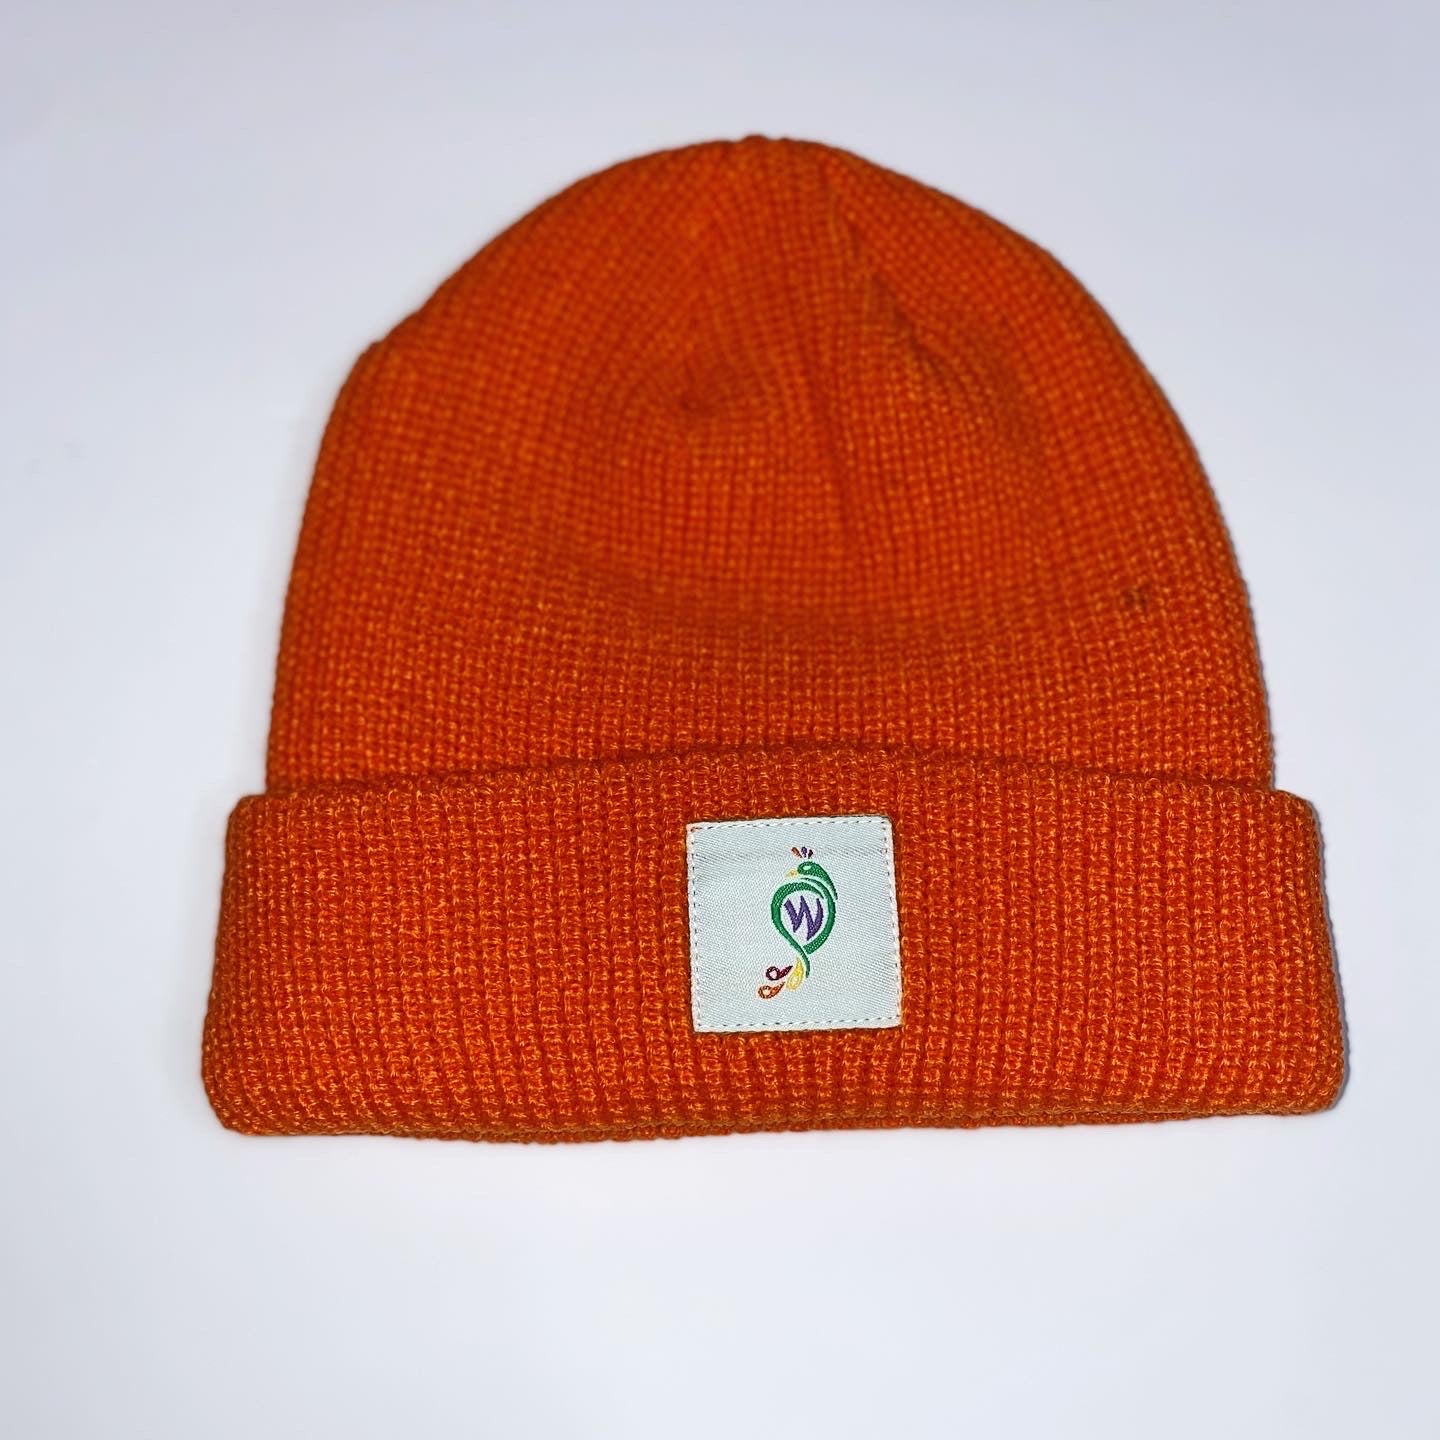 Square patch beanies